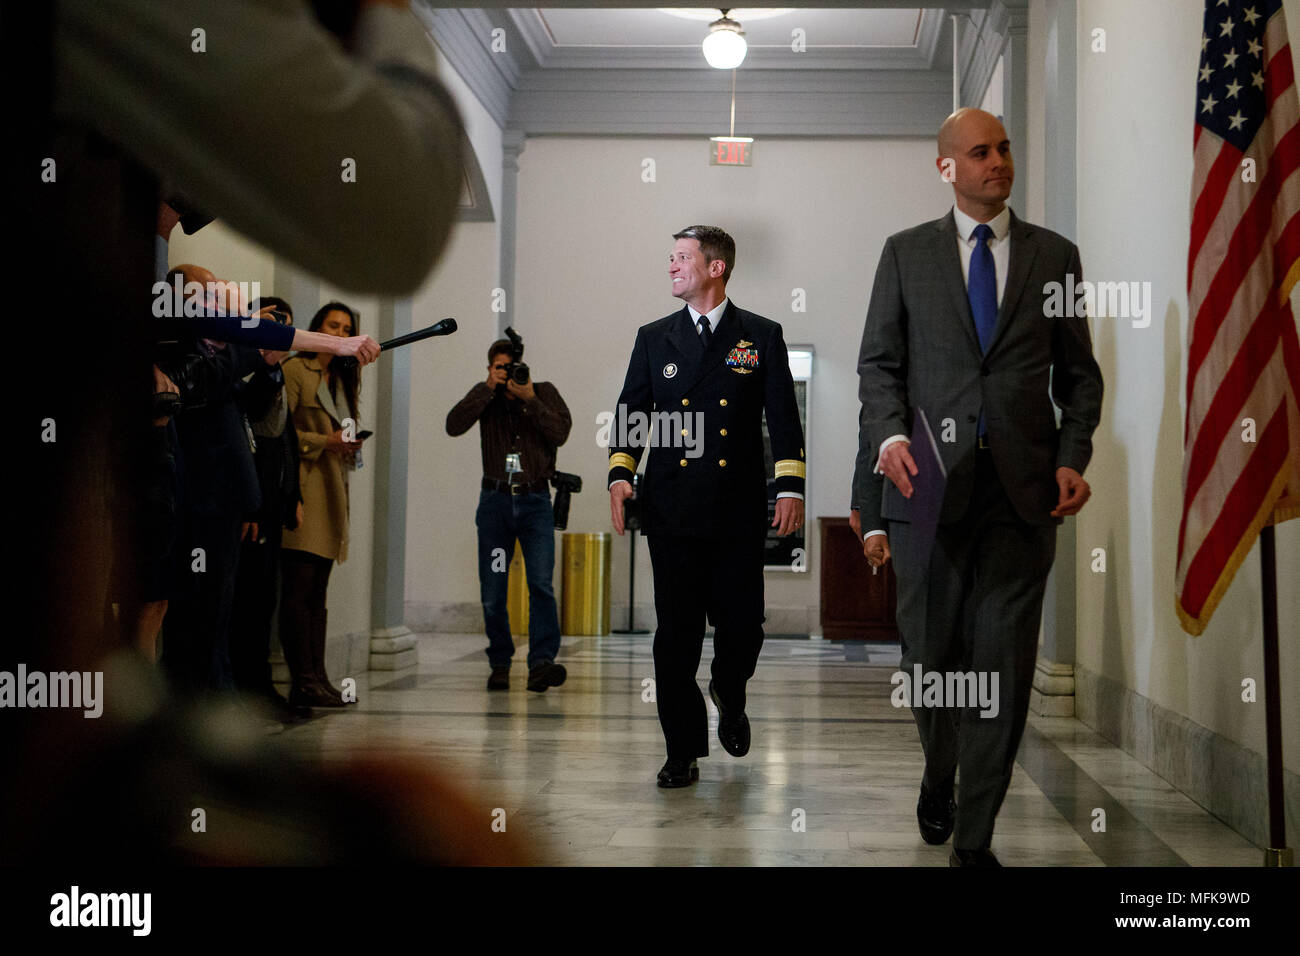 Washington, USA. 16th Apr, 2018. Veterans Affairs Secretary nominee Ronny Jackson (C) is seen on Capitol Hill in Washington, DC, the United States, on April 16, 2018. White House physician Ronny Jackson announced on April 26 that he had withdrawn from President Donald Trump's nomination to be the next Veterans Affairs Secretary, in the wake of a series of allegations that he had fostered a hostile work environment and behaved improperly while serving as the top doctor in the White House. Credit: Ting Shen/Xinhua/Alamy Live News Stock Photo